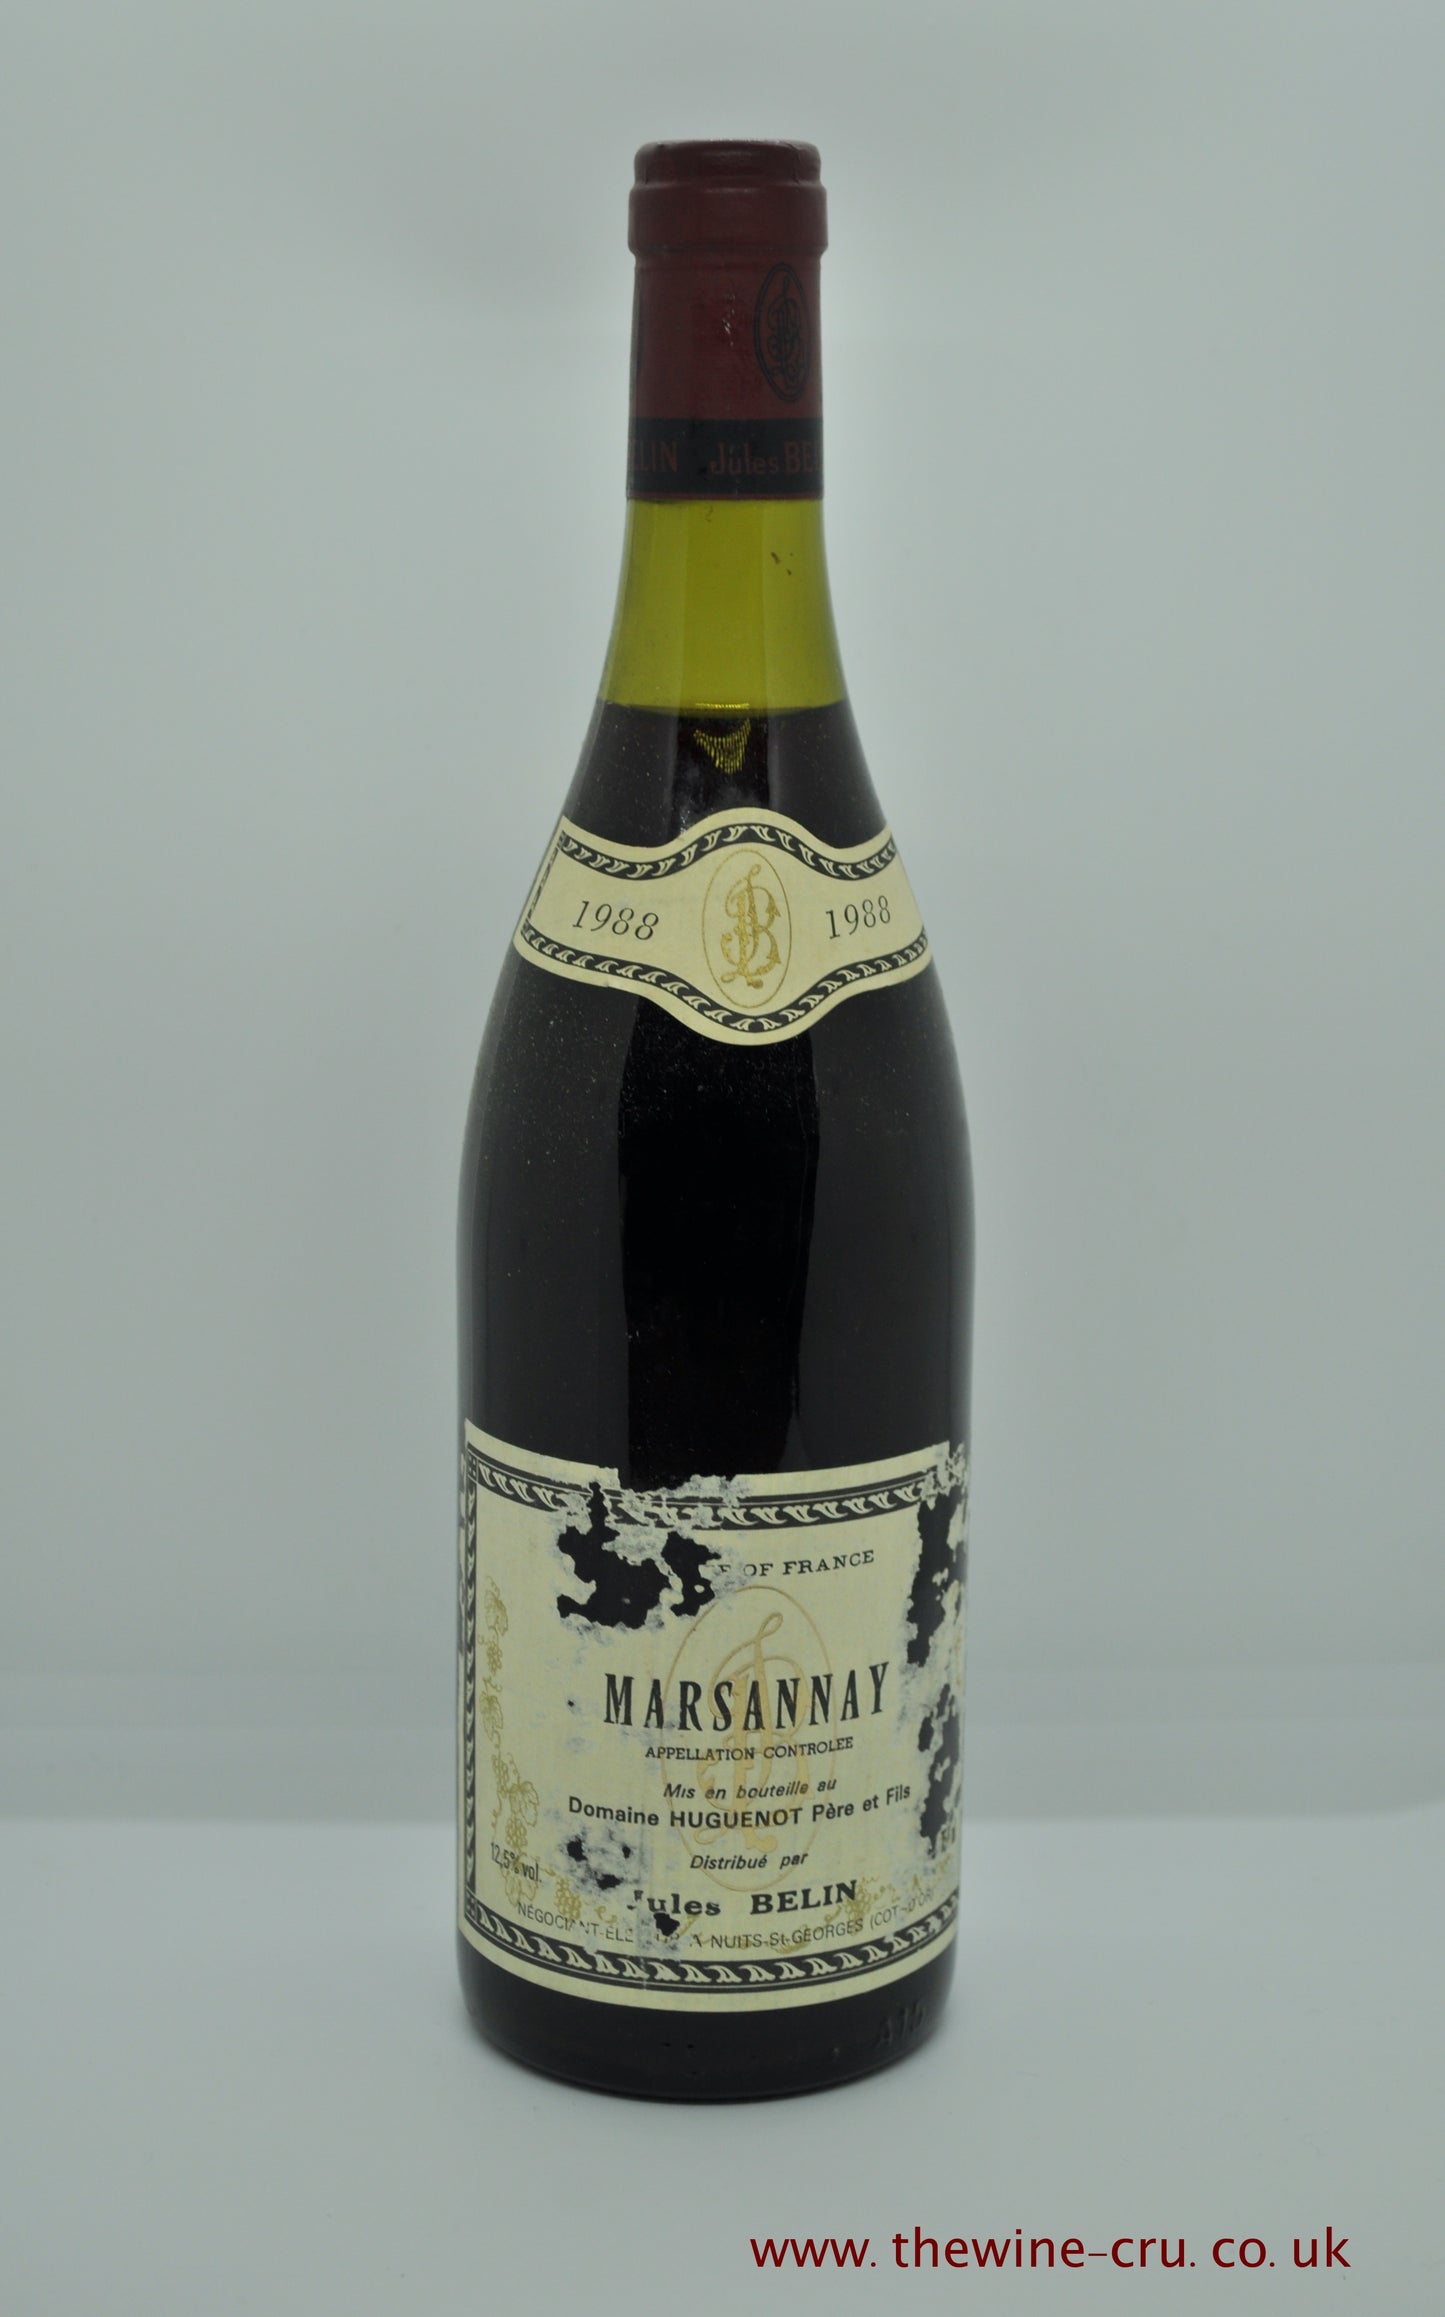 1988 vintage red wine. Marsannay Domaine Huguenot 1988. france Burgundy. Immediate delivery UK. Free local delivery.